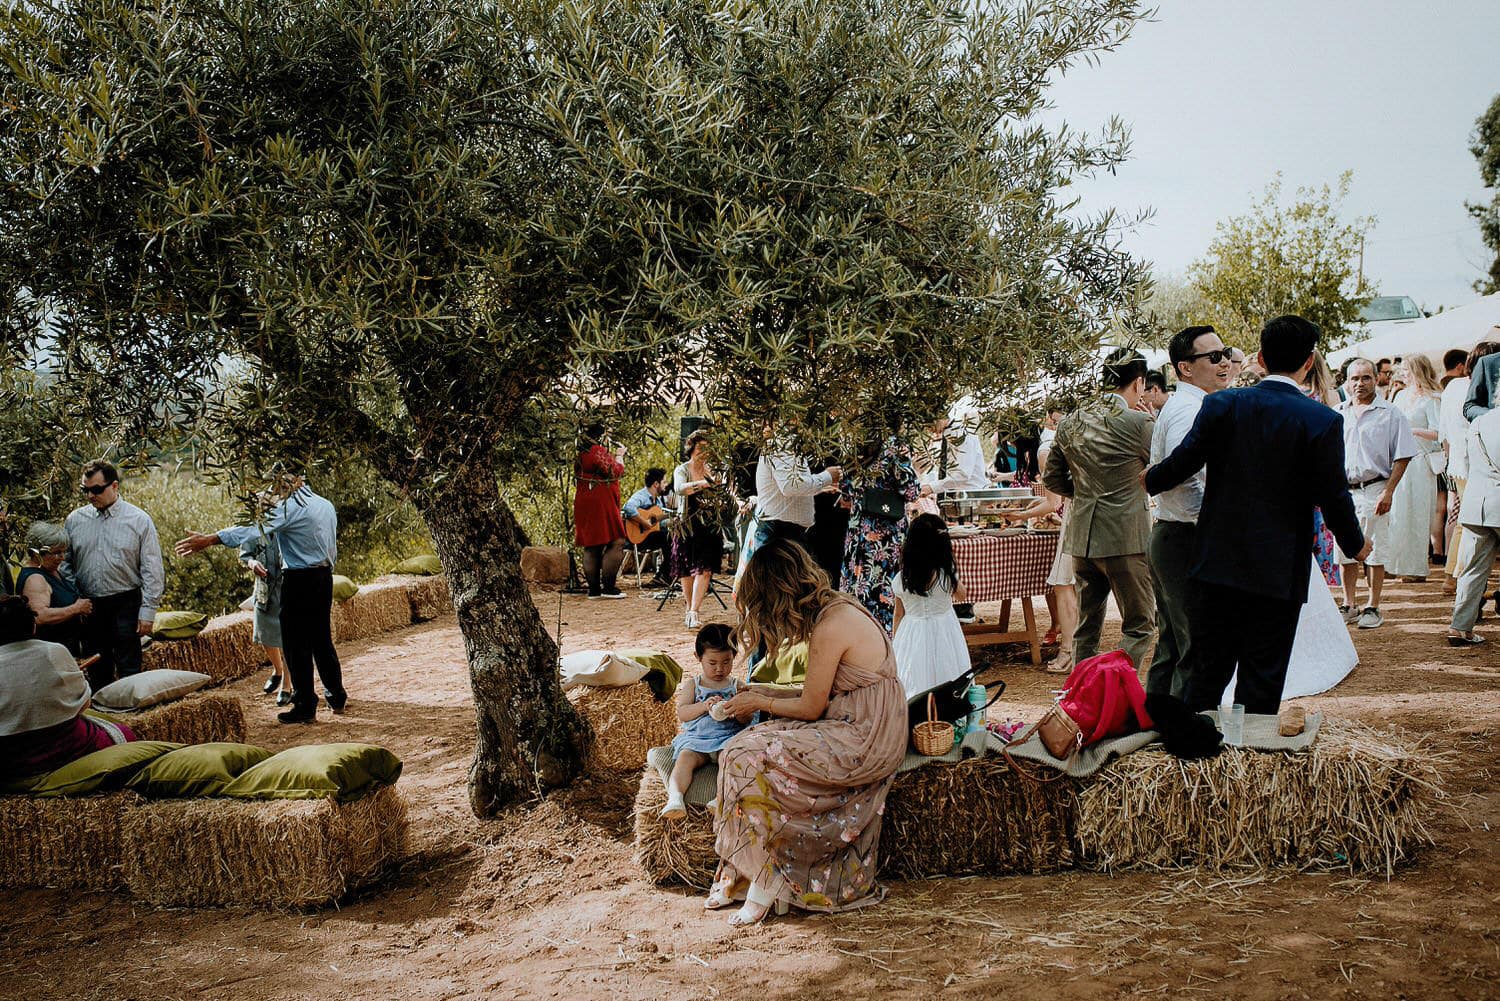 Charming Destination Wedding in the Portuguese Countryside - rustic diy reception with hay bales and olive trees